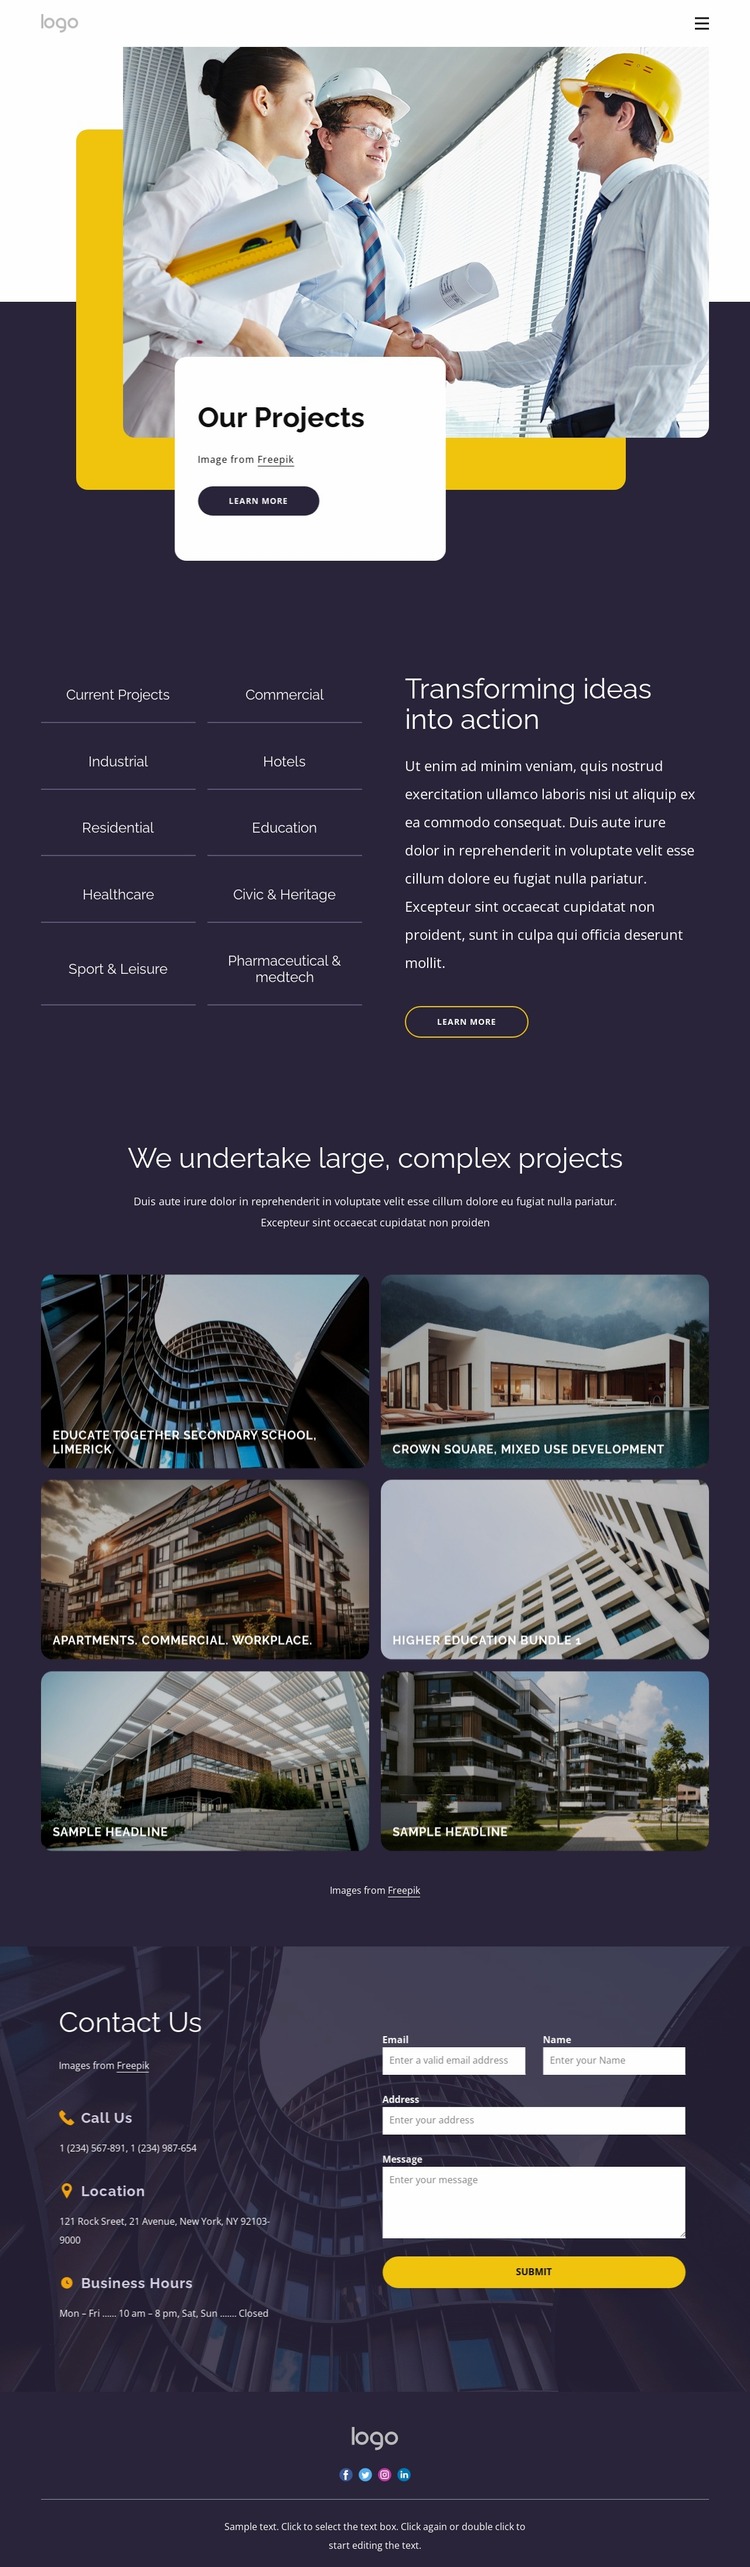 Building and construction projects Website Mockup